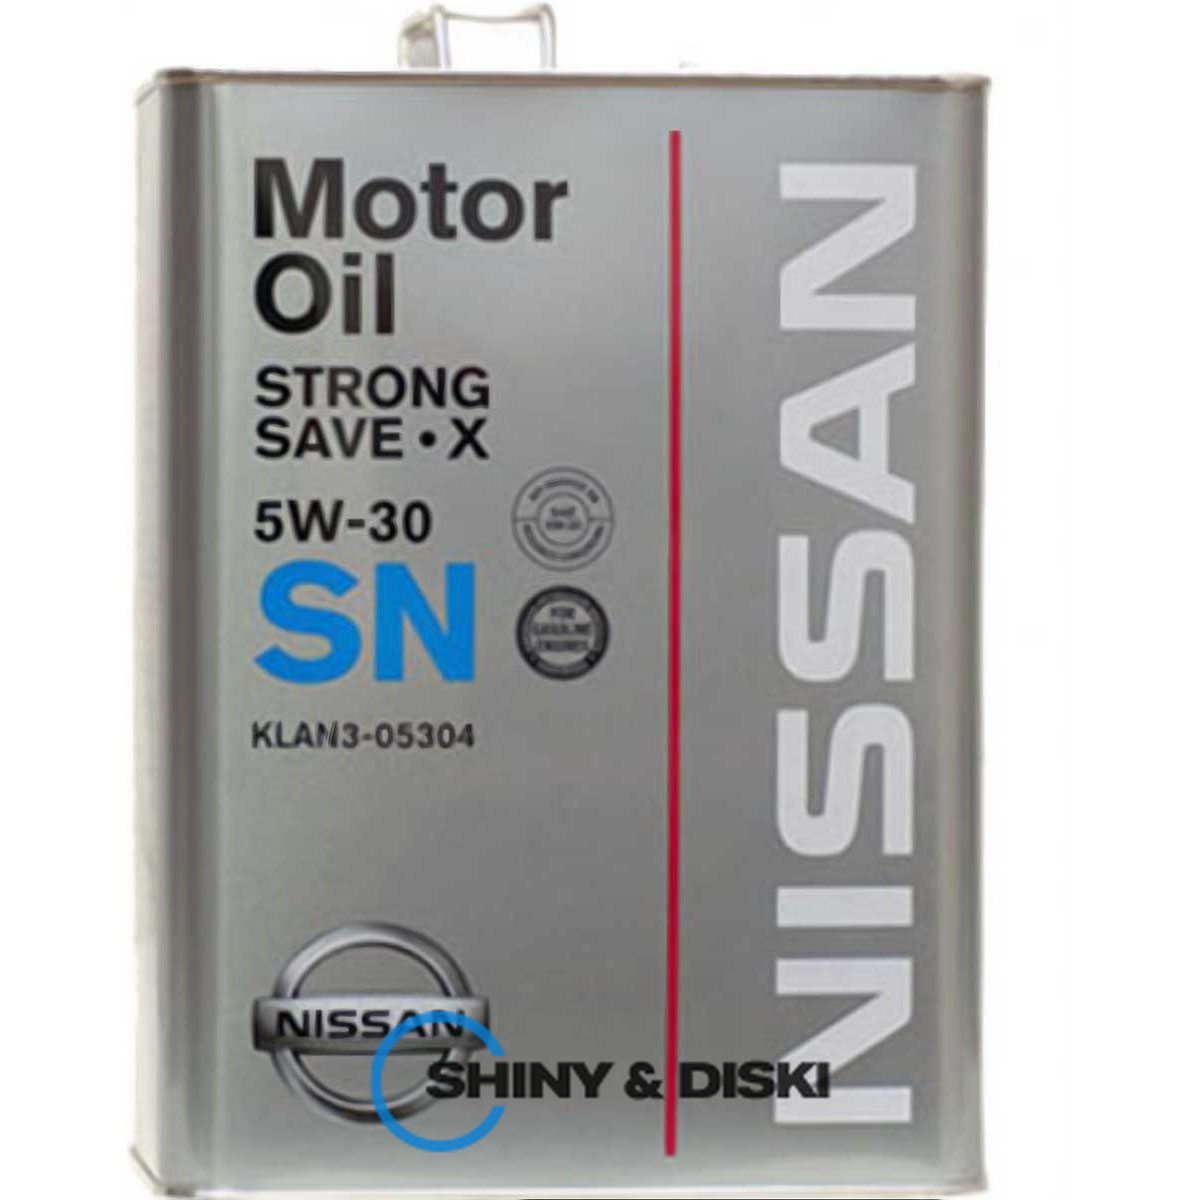 nissan sn strong save x 5w-30 (4л)